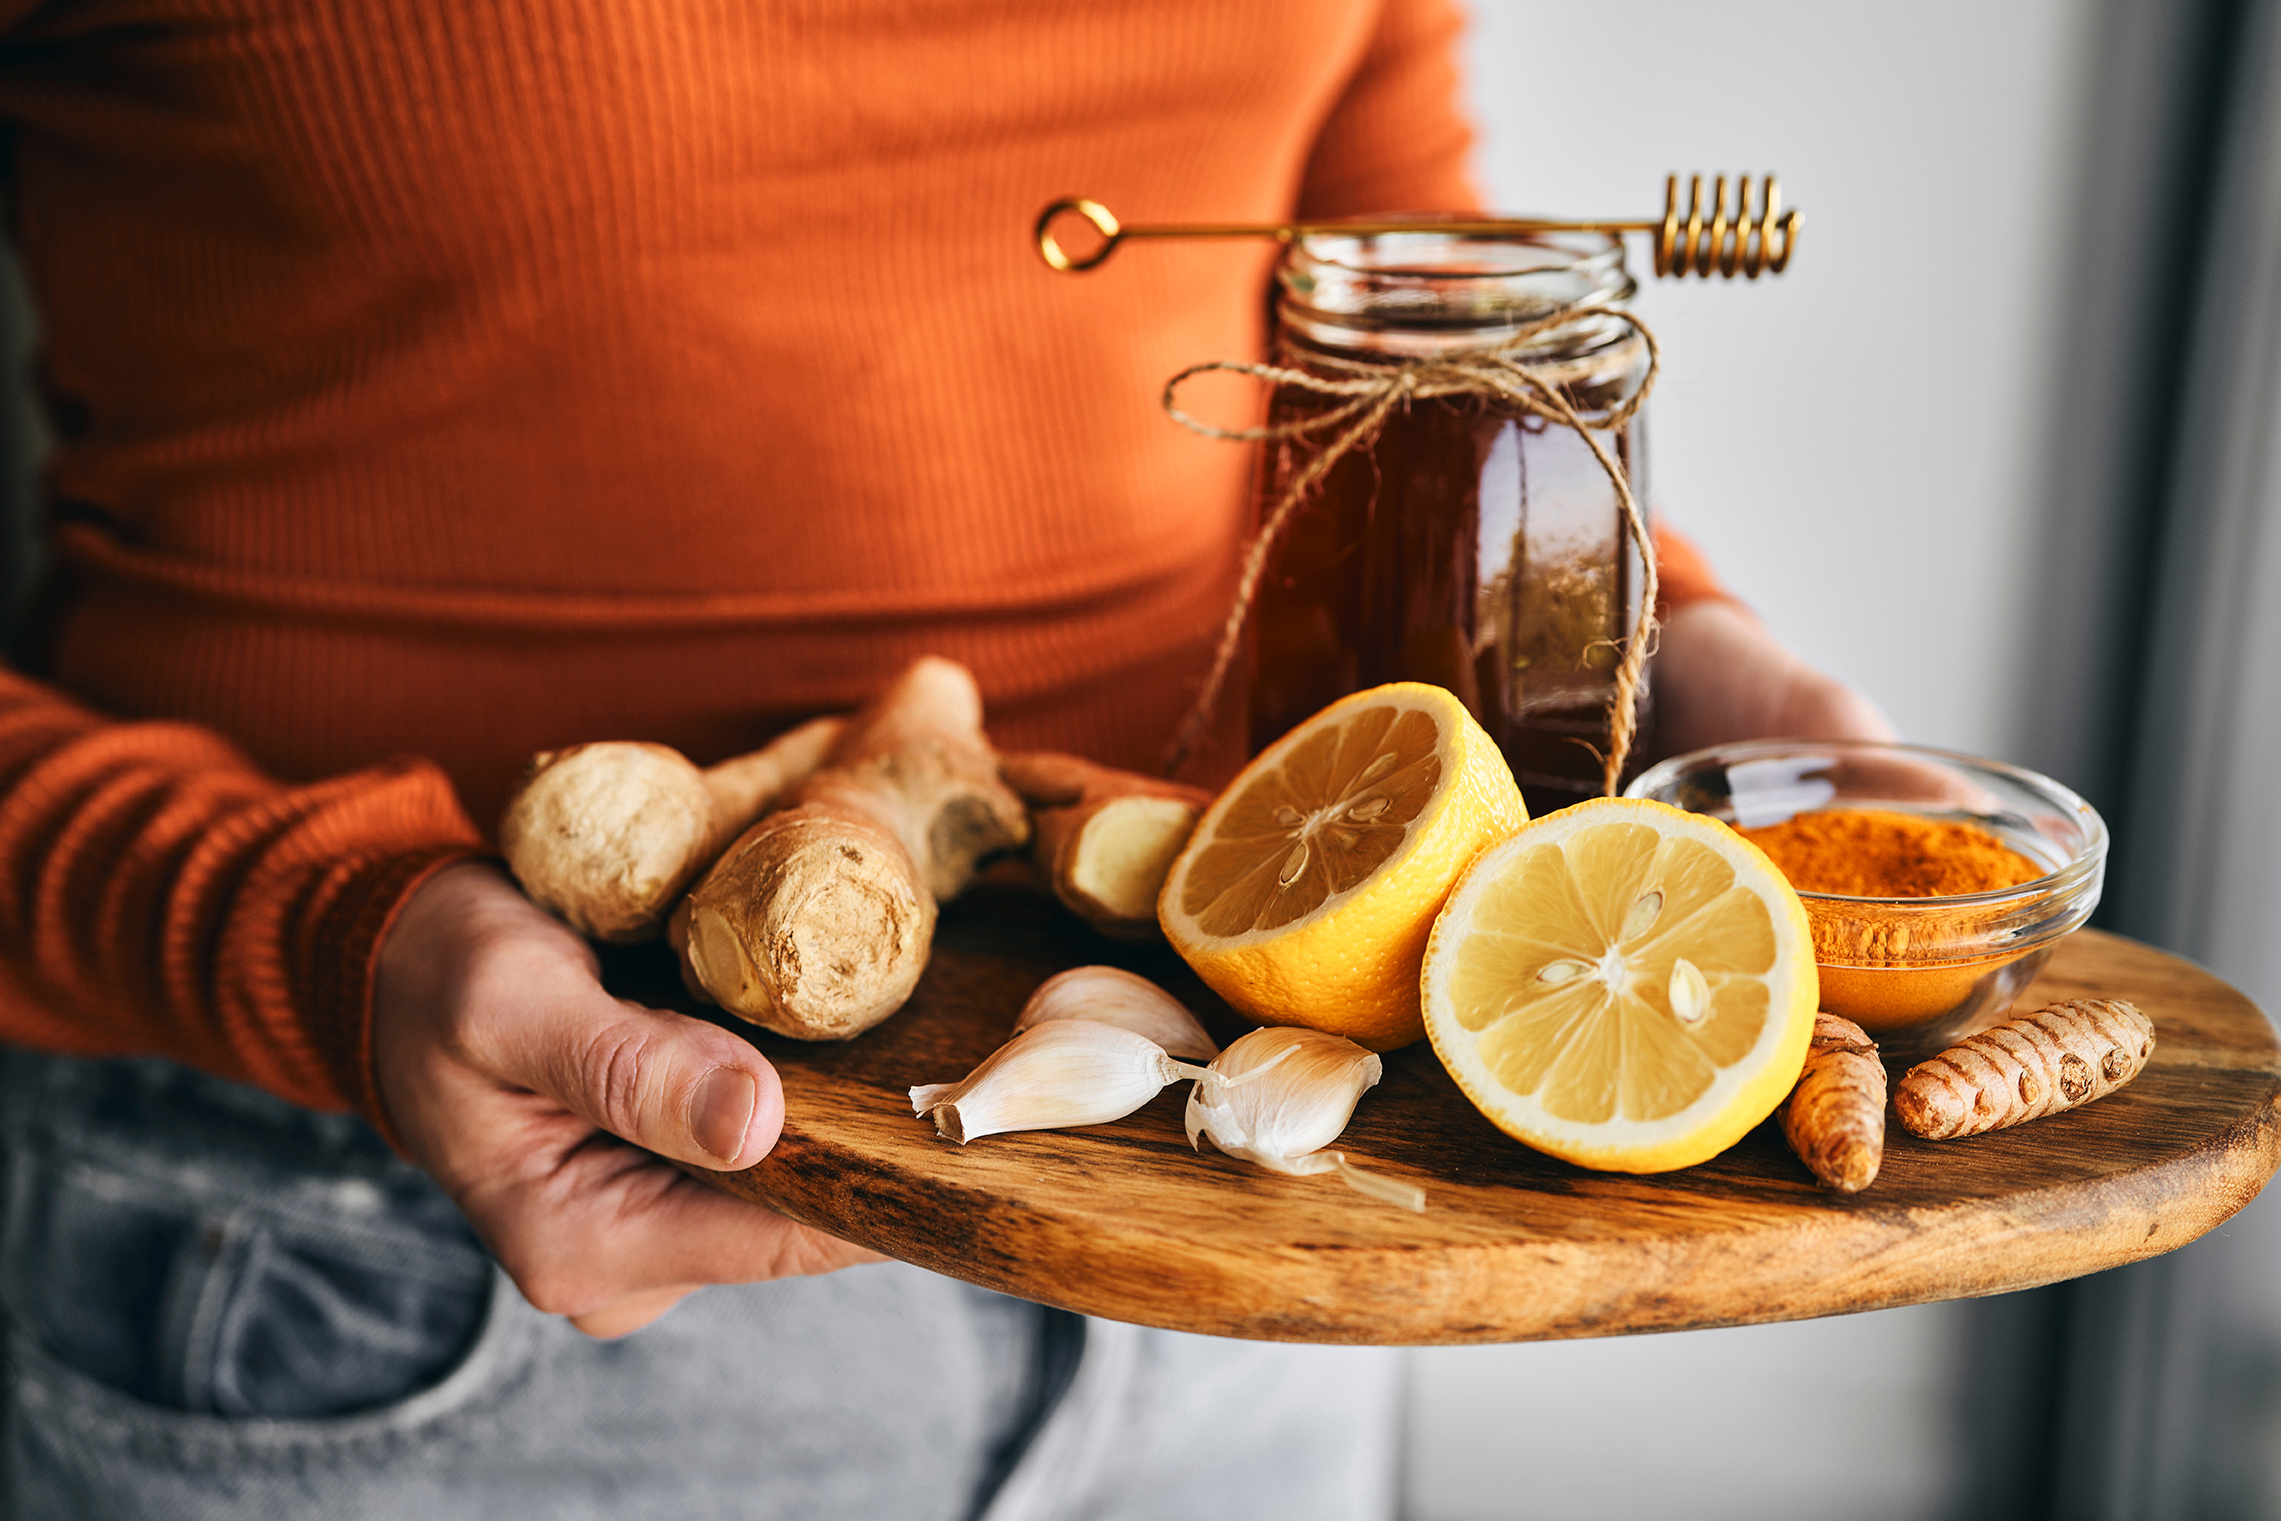 Woman holding a wooden tray with natural cold remedies including ginger root, halved lemons, garlic cloves, a jar of honey with a honey dipper, and a small bowl of turmeric powder."